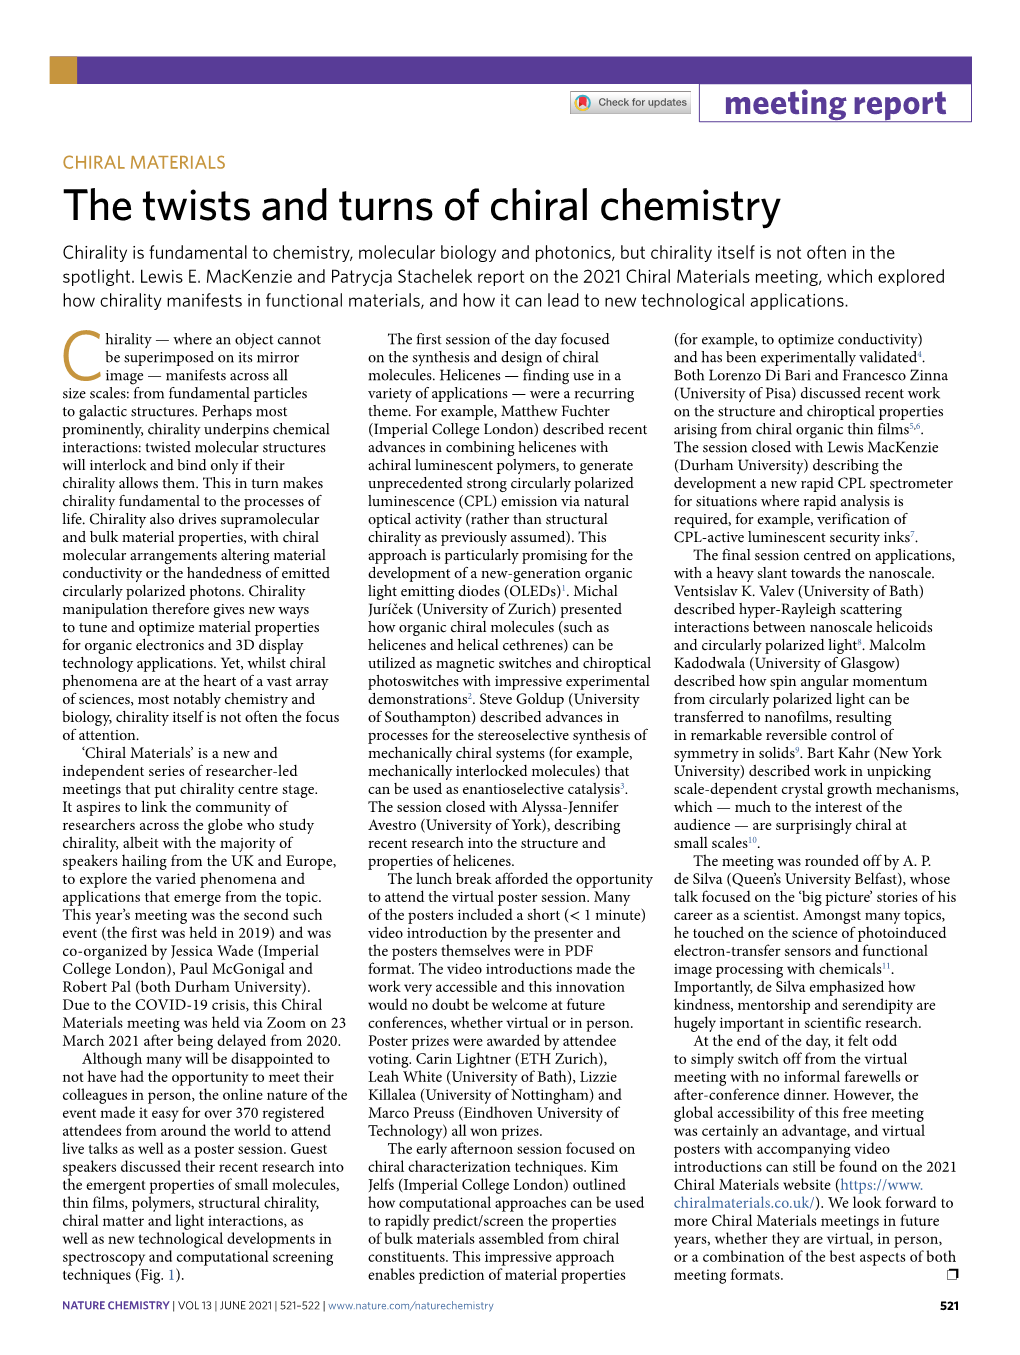 The Twists and Turns of Chiral Chemistry Chirality Is Fundamental to Chemistry, Molecular Biology and Photonics, but Chirality Itself Is Not Often in the Spotlight